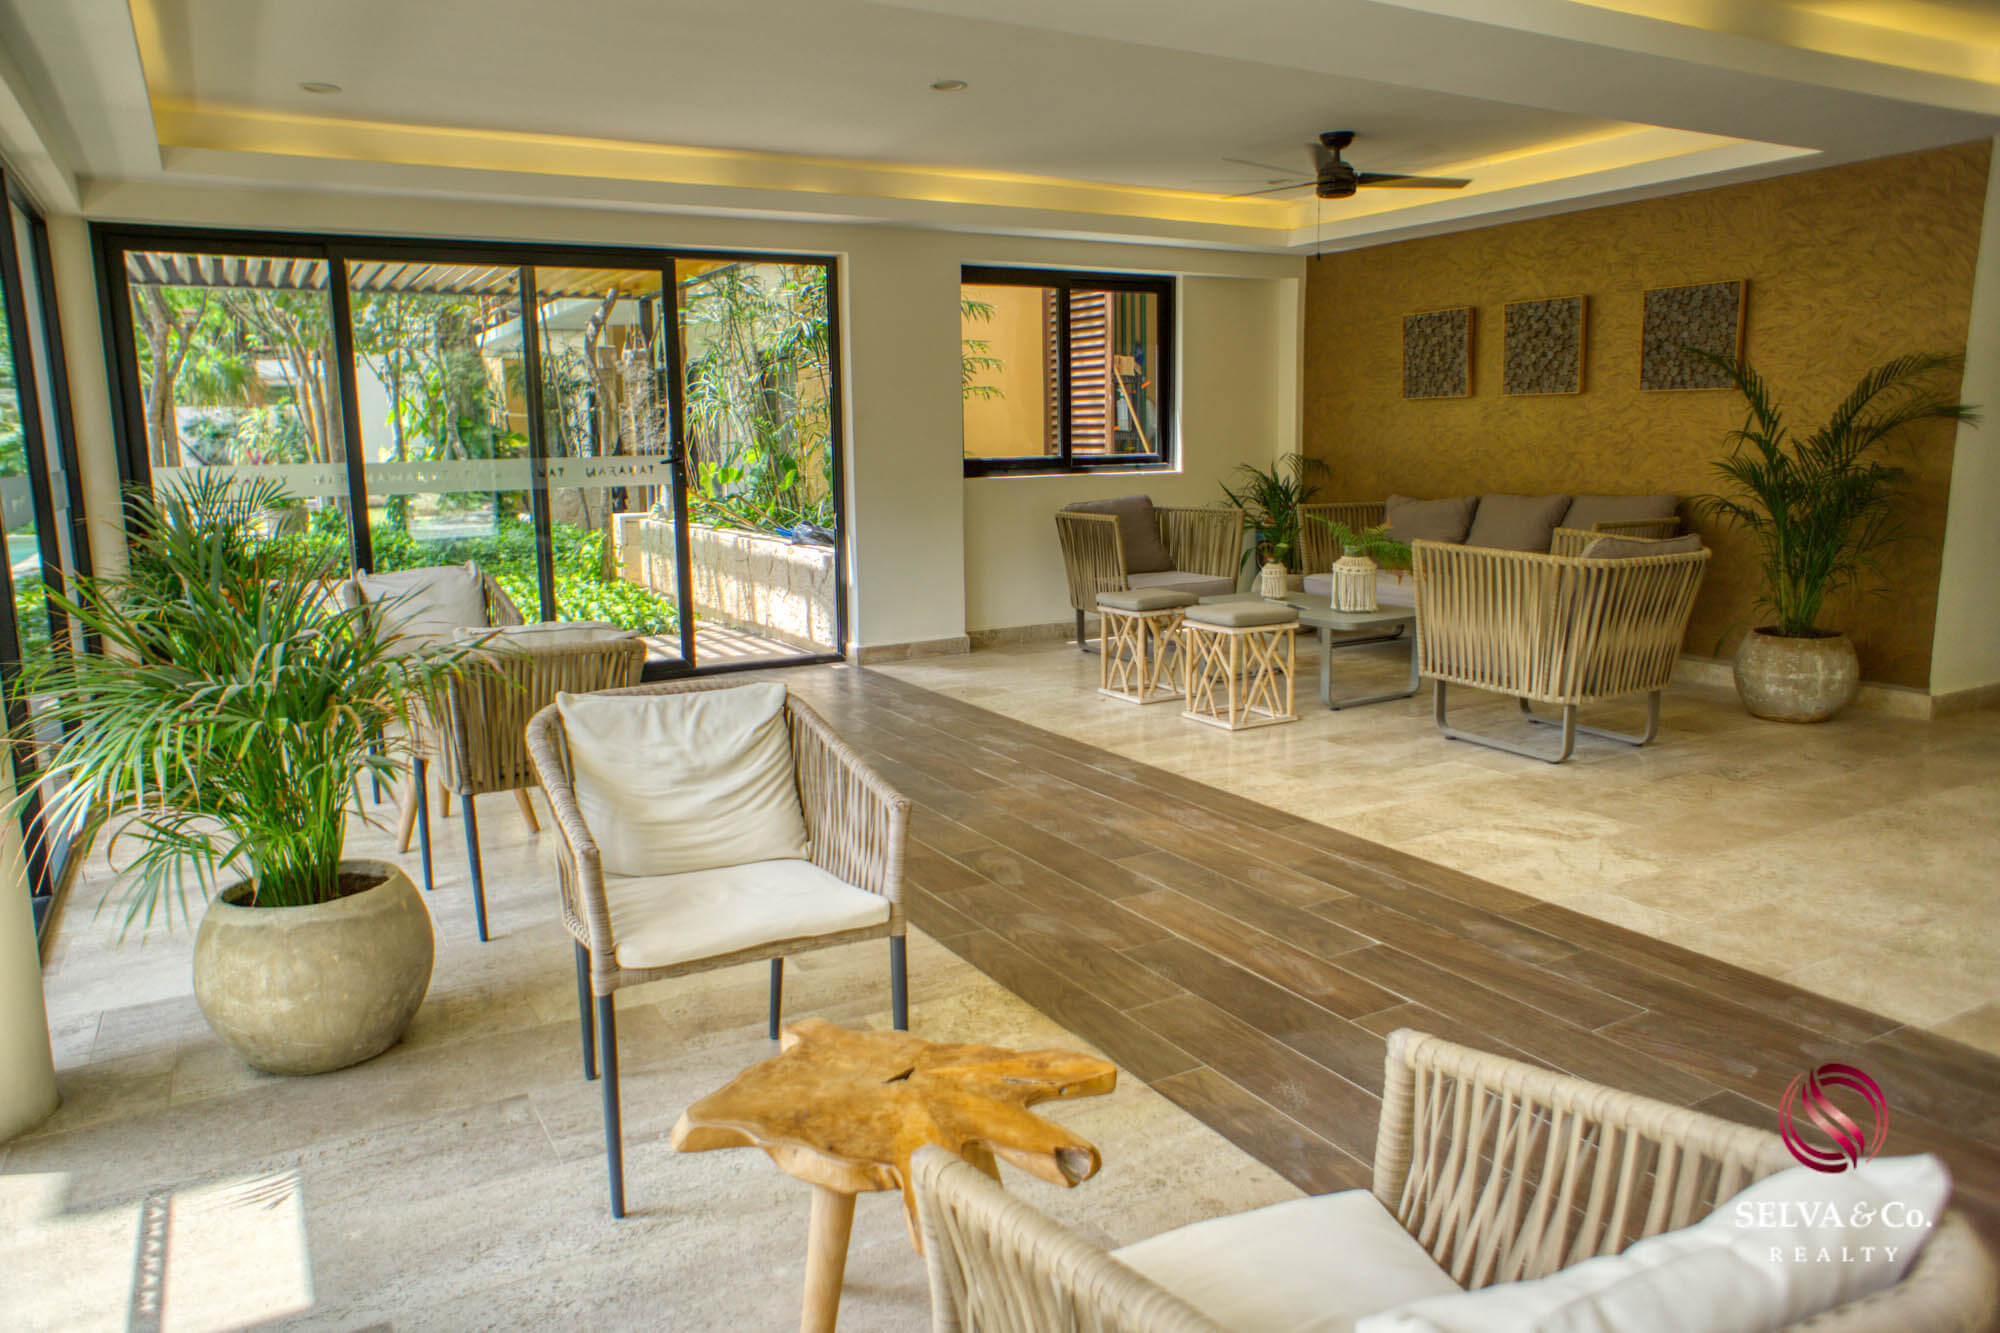 Condo with a large terrace of 35 m2, yoga area, barbecue area, 2 pools with lounge areas, pre-construction, sale Tulum.